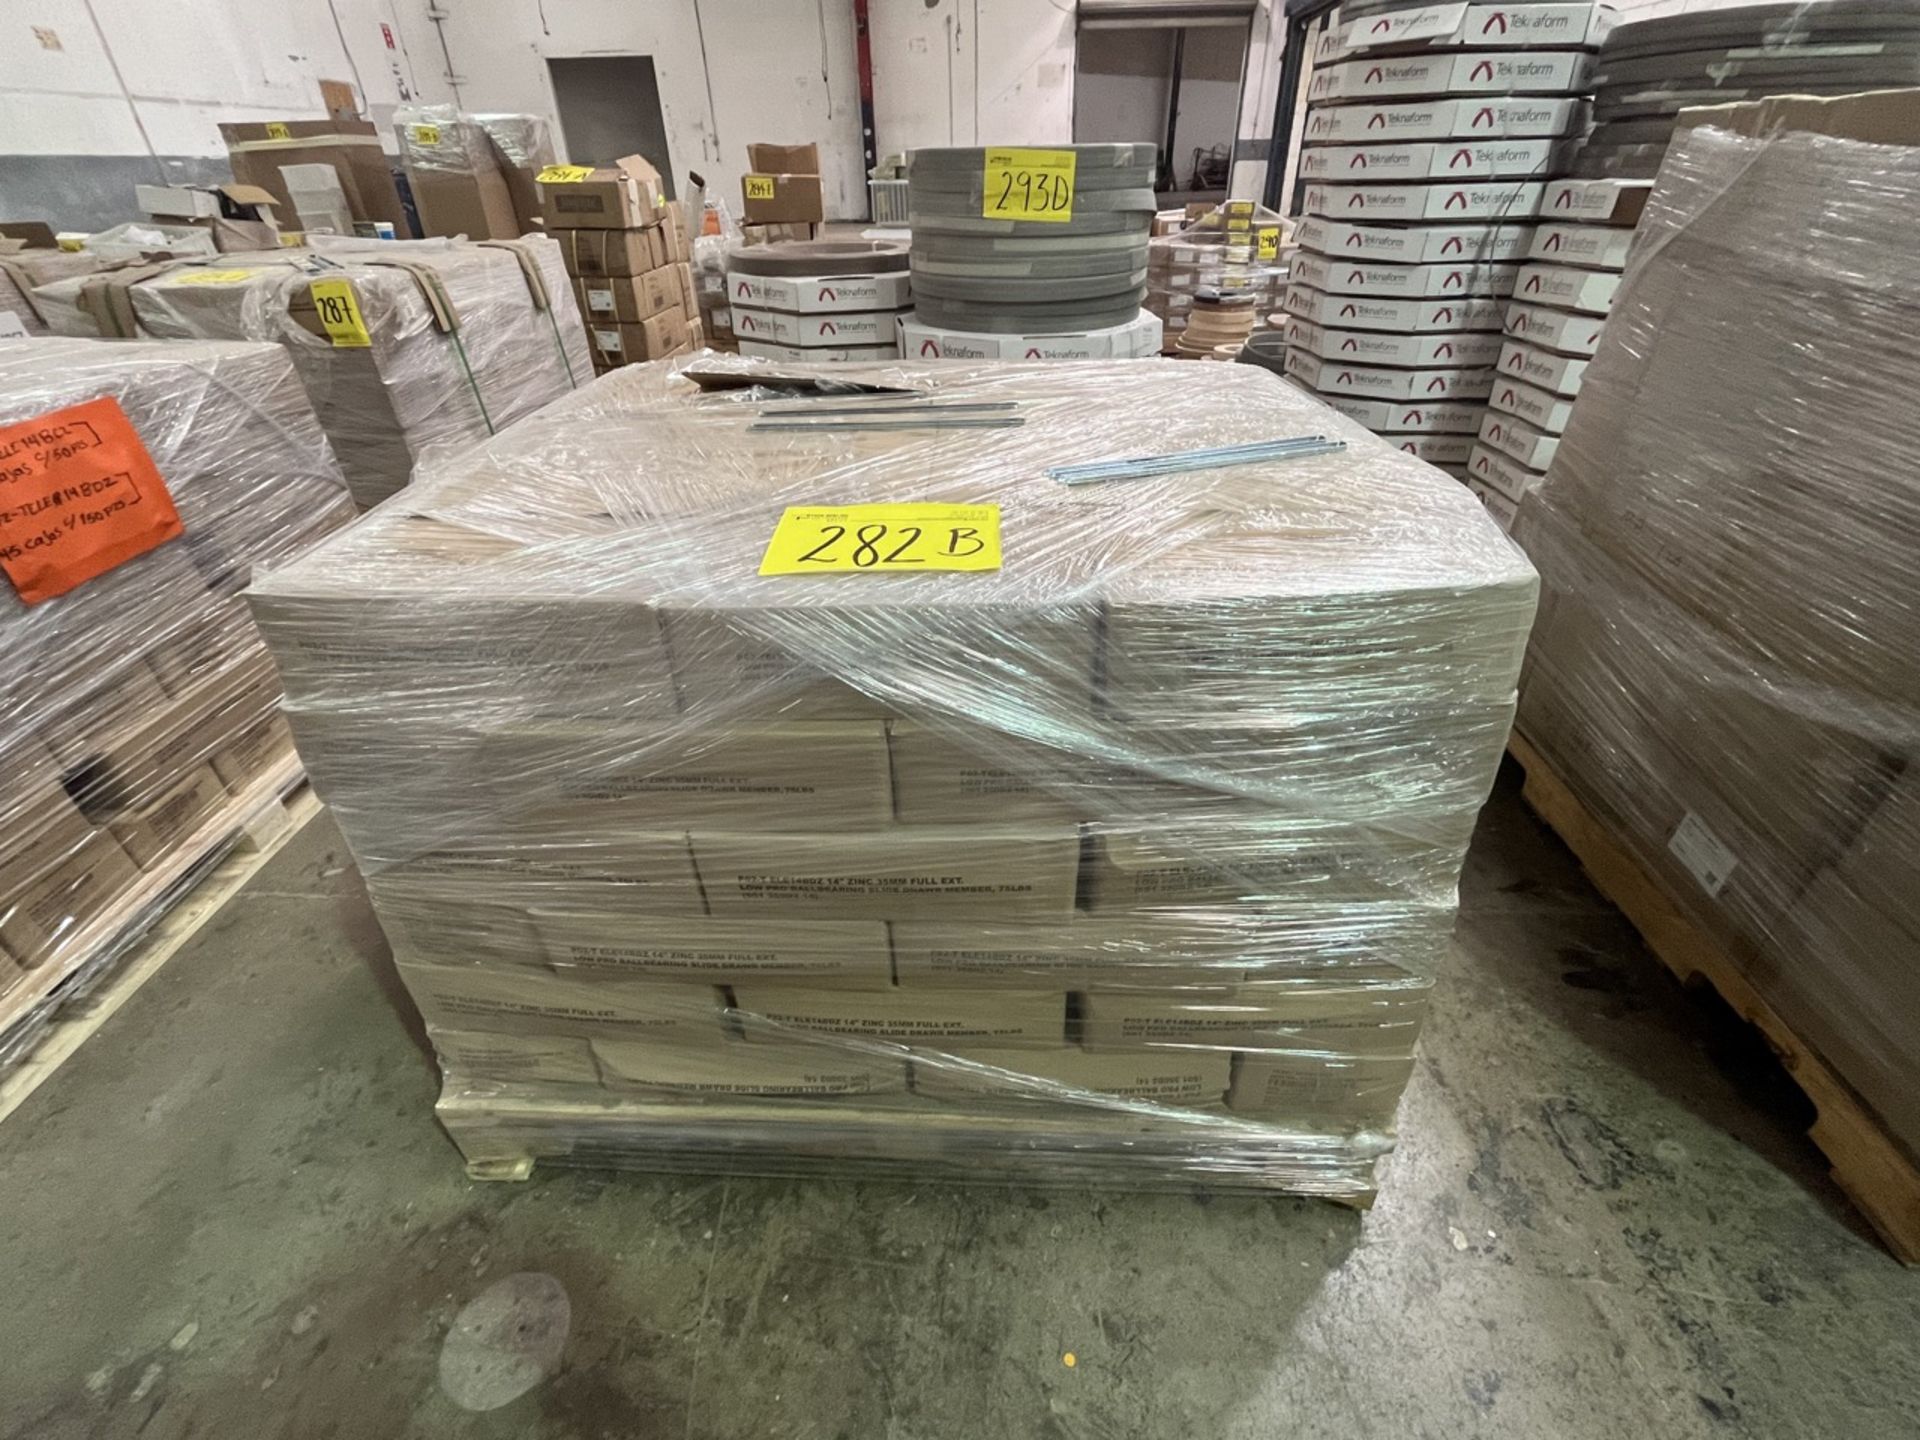 (NEW) Pallet with 90 boxes with 150 each box of safety slides, Model P02-TELE14BDZ / (NUEVO) Tarima